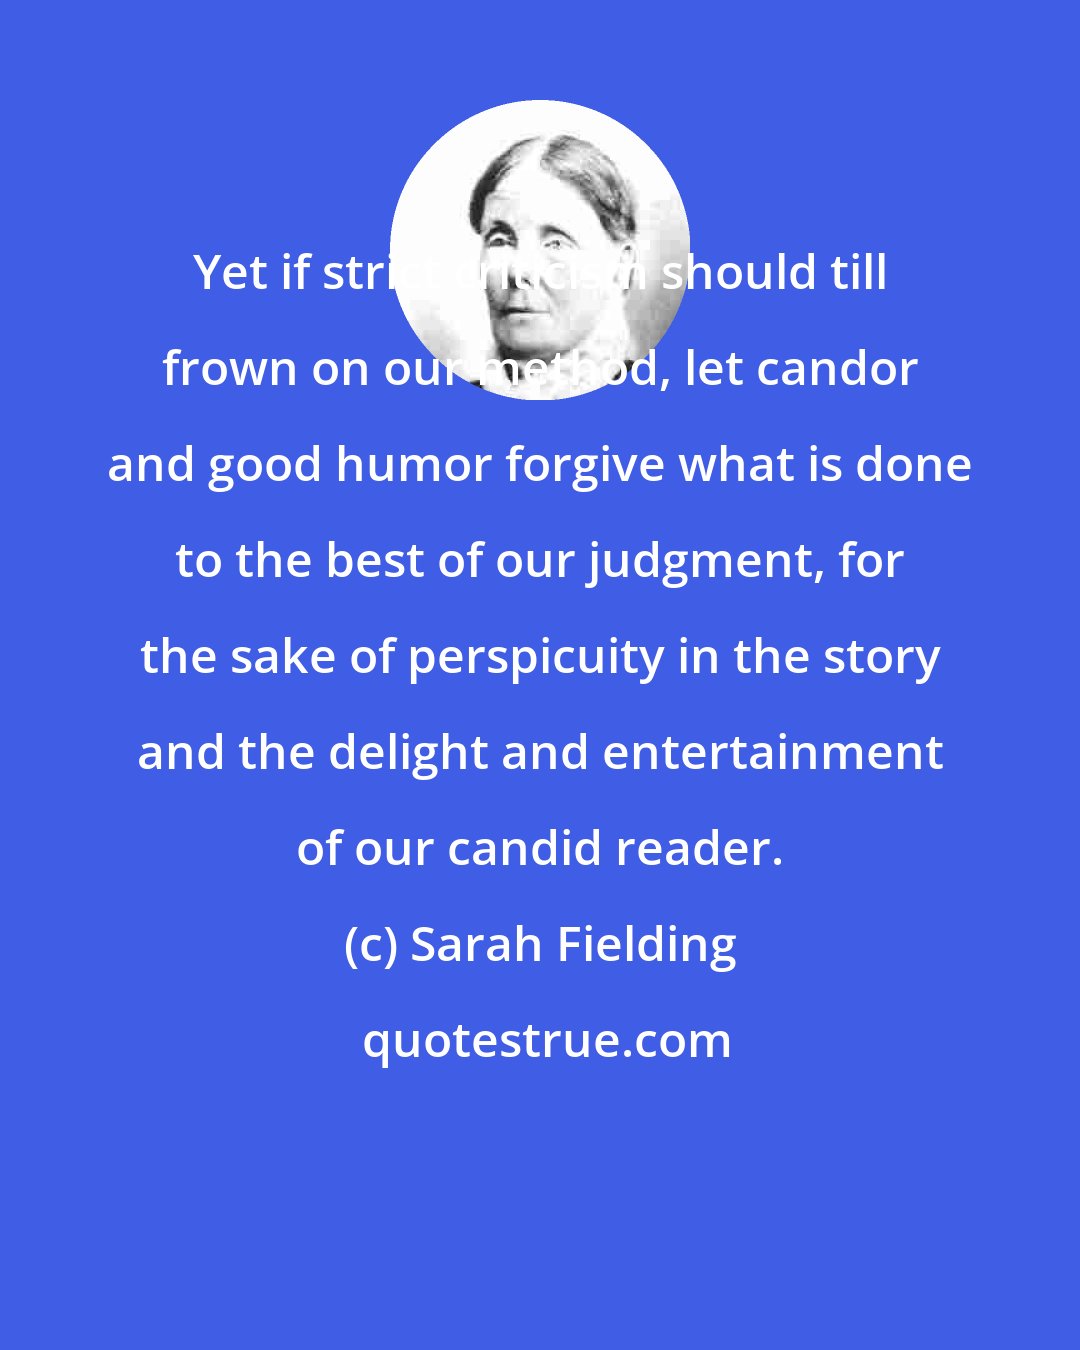 Sarah Fielding: Yet if strict criticism should till frown on our method, let candor and good humor forgive what is done to the best of our judgment, for the sake of perspicuity in the story and the delight and entertainment of our candid reader.